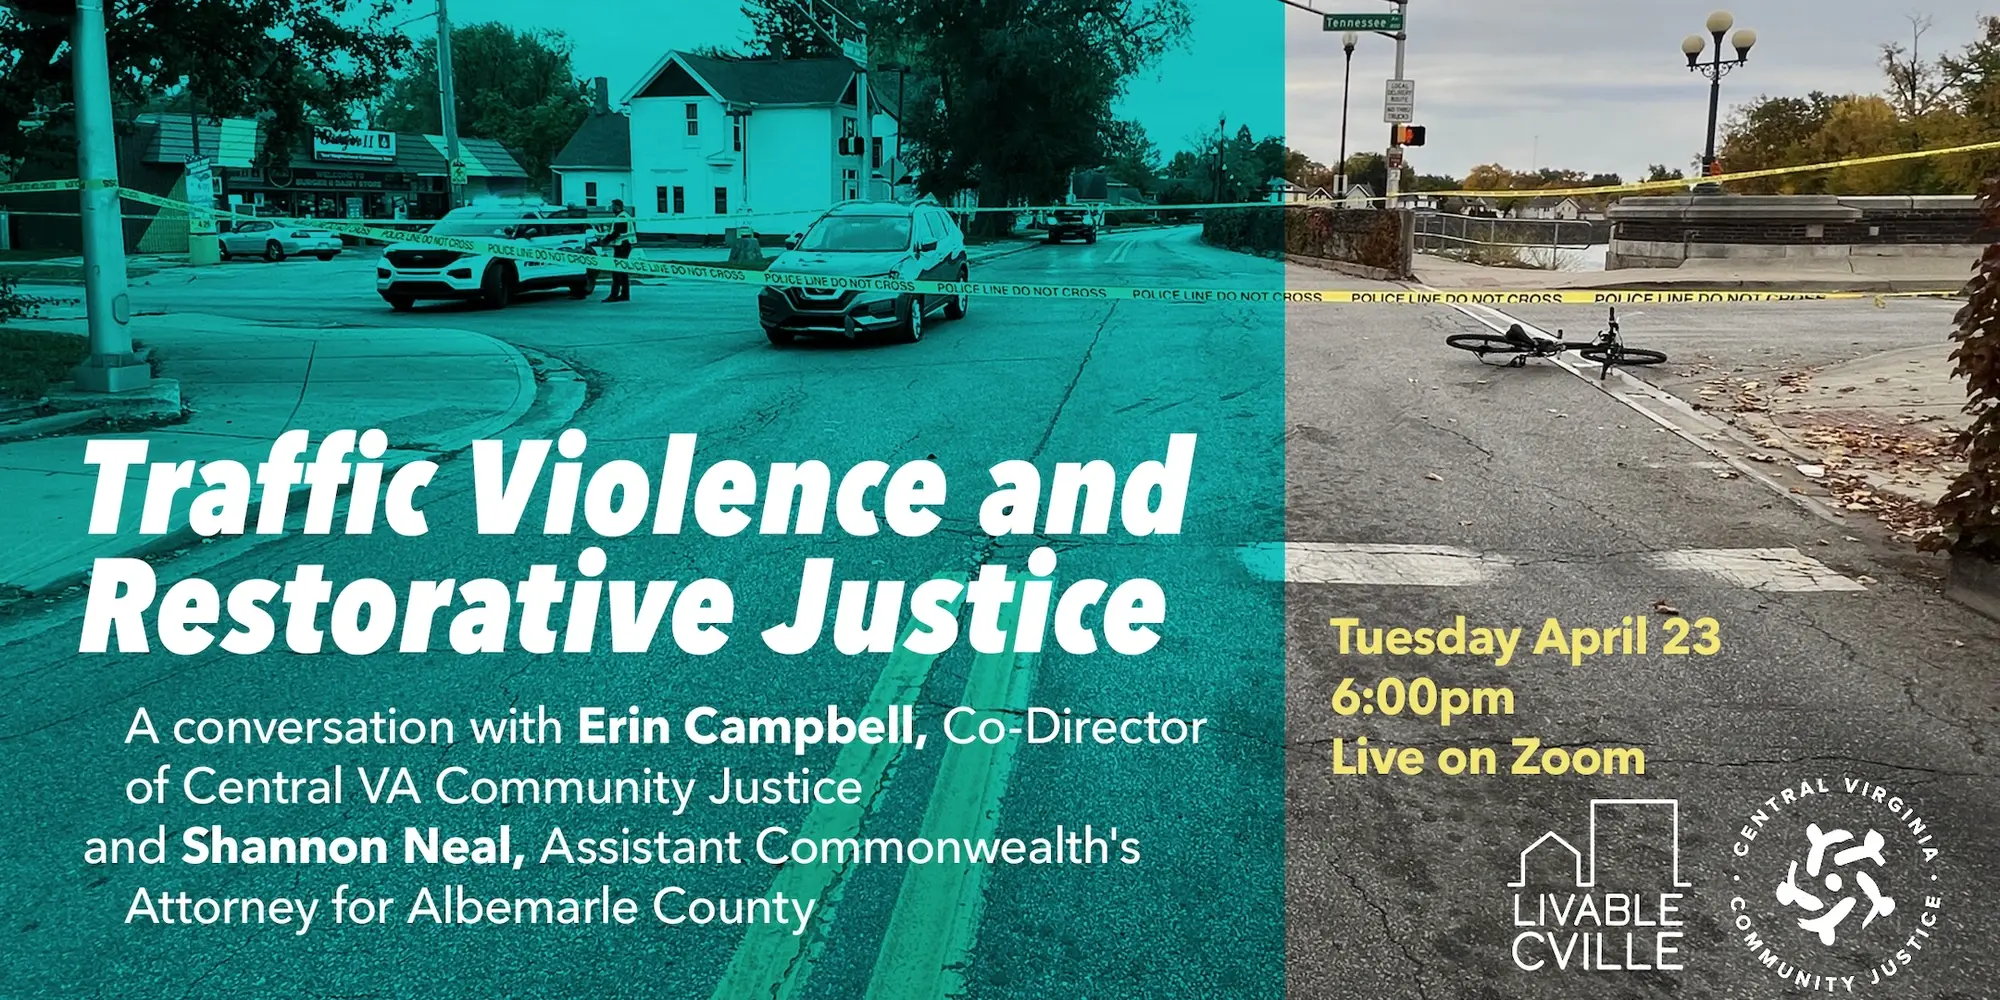 Traffic Violence and Restorative Justice A Conversation with Erin Campbell, Co-Director of Central Virginia Community Justice and Shannon Neal, Assistant Commonwealth's Attorney for Albemarle County Tuesday April 23 6:00pm Live on Zoom